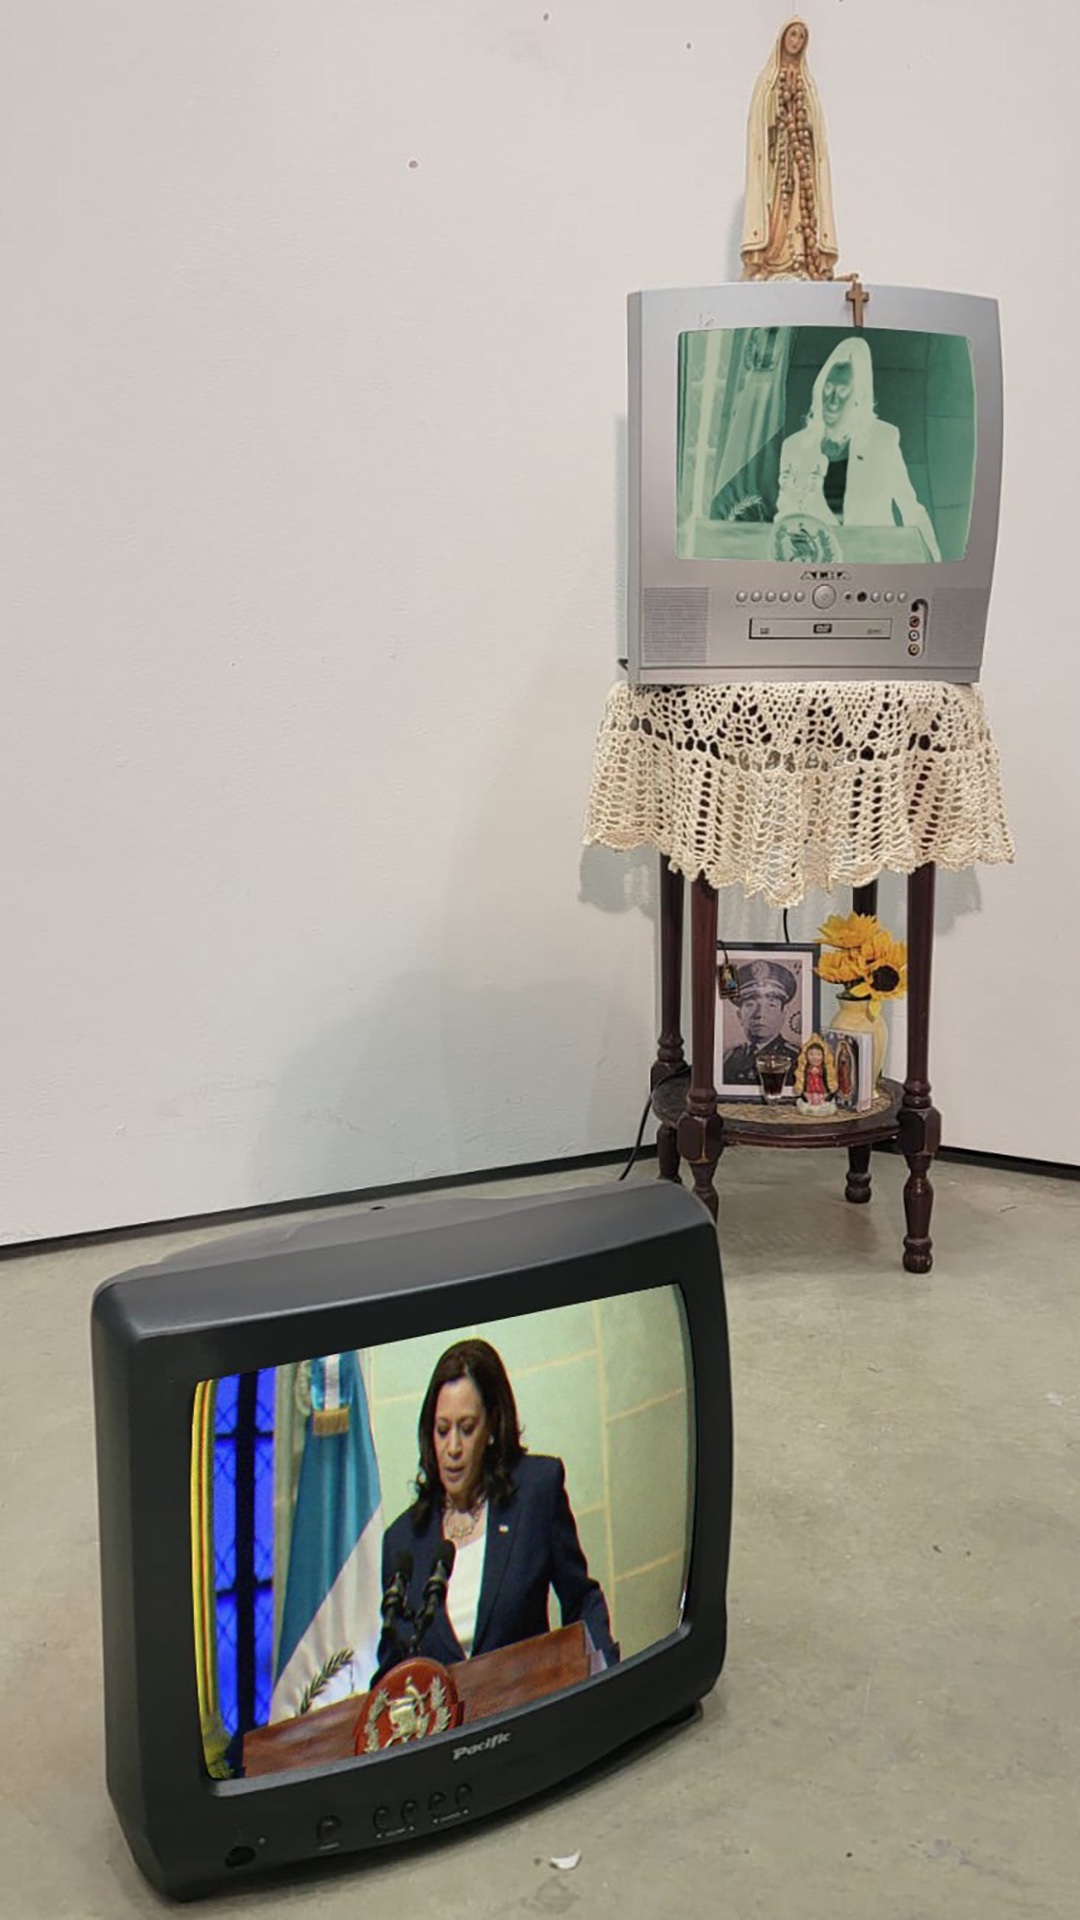 2 CRT TVs against white panels. A looped video of Kamala Harris in Guatemala plays on both TVs